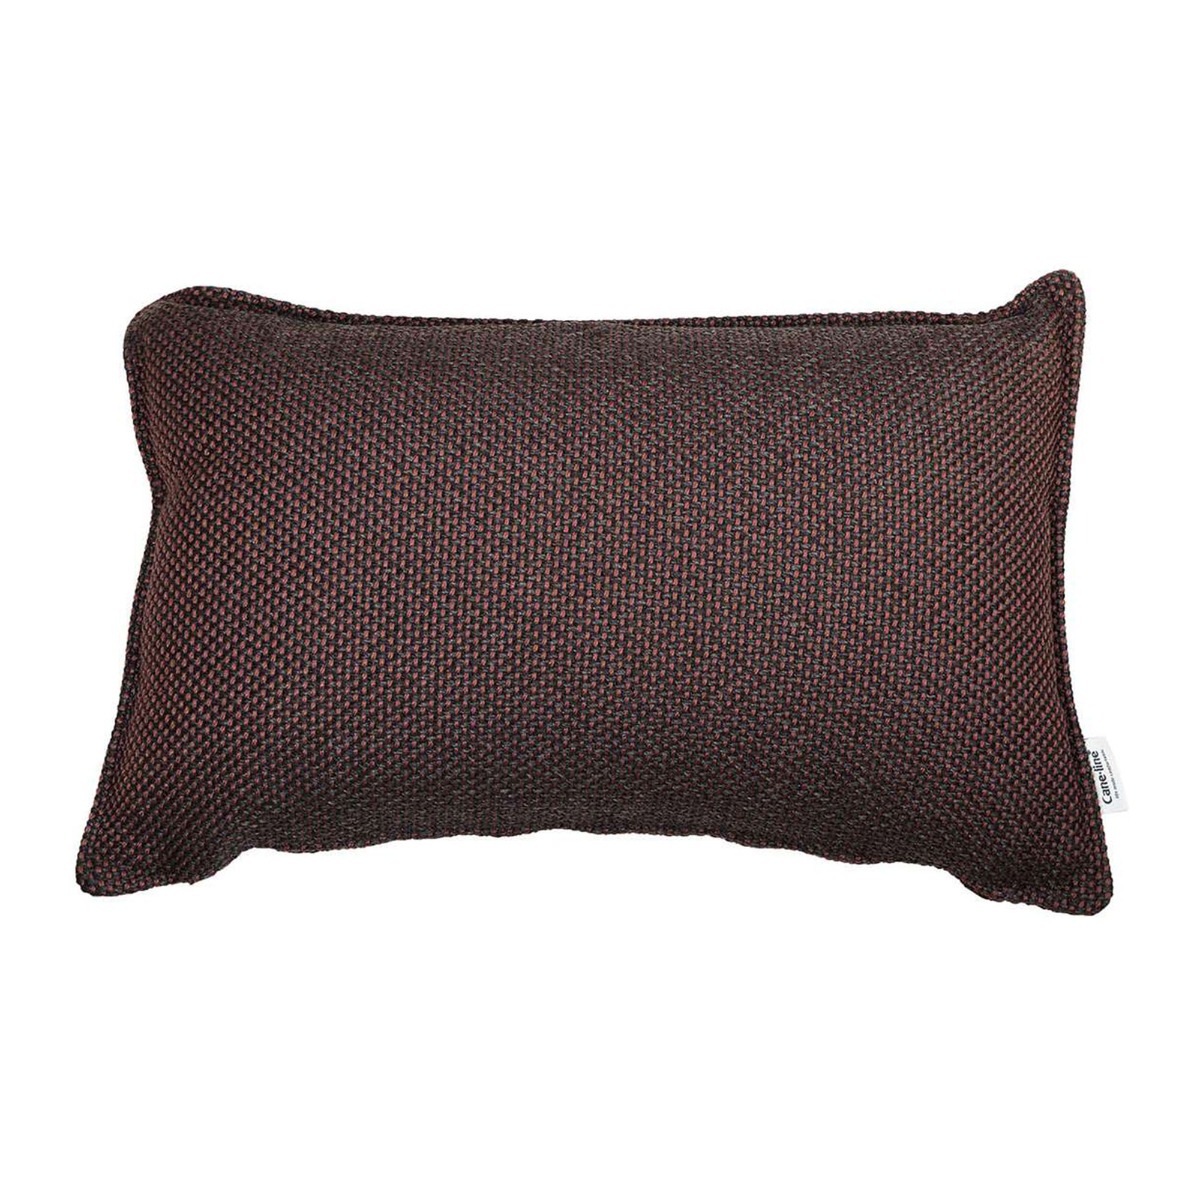 Cane Line Focus Scatter Cushion 52x32x12cm, Square, Red | Barker & Stonehouse